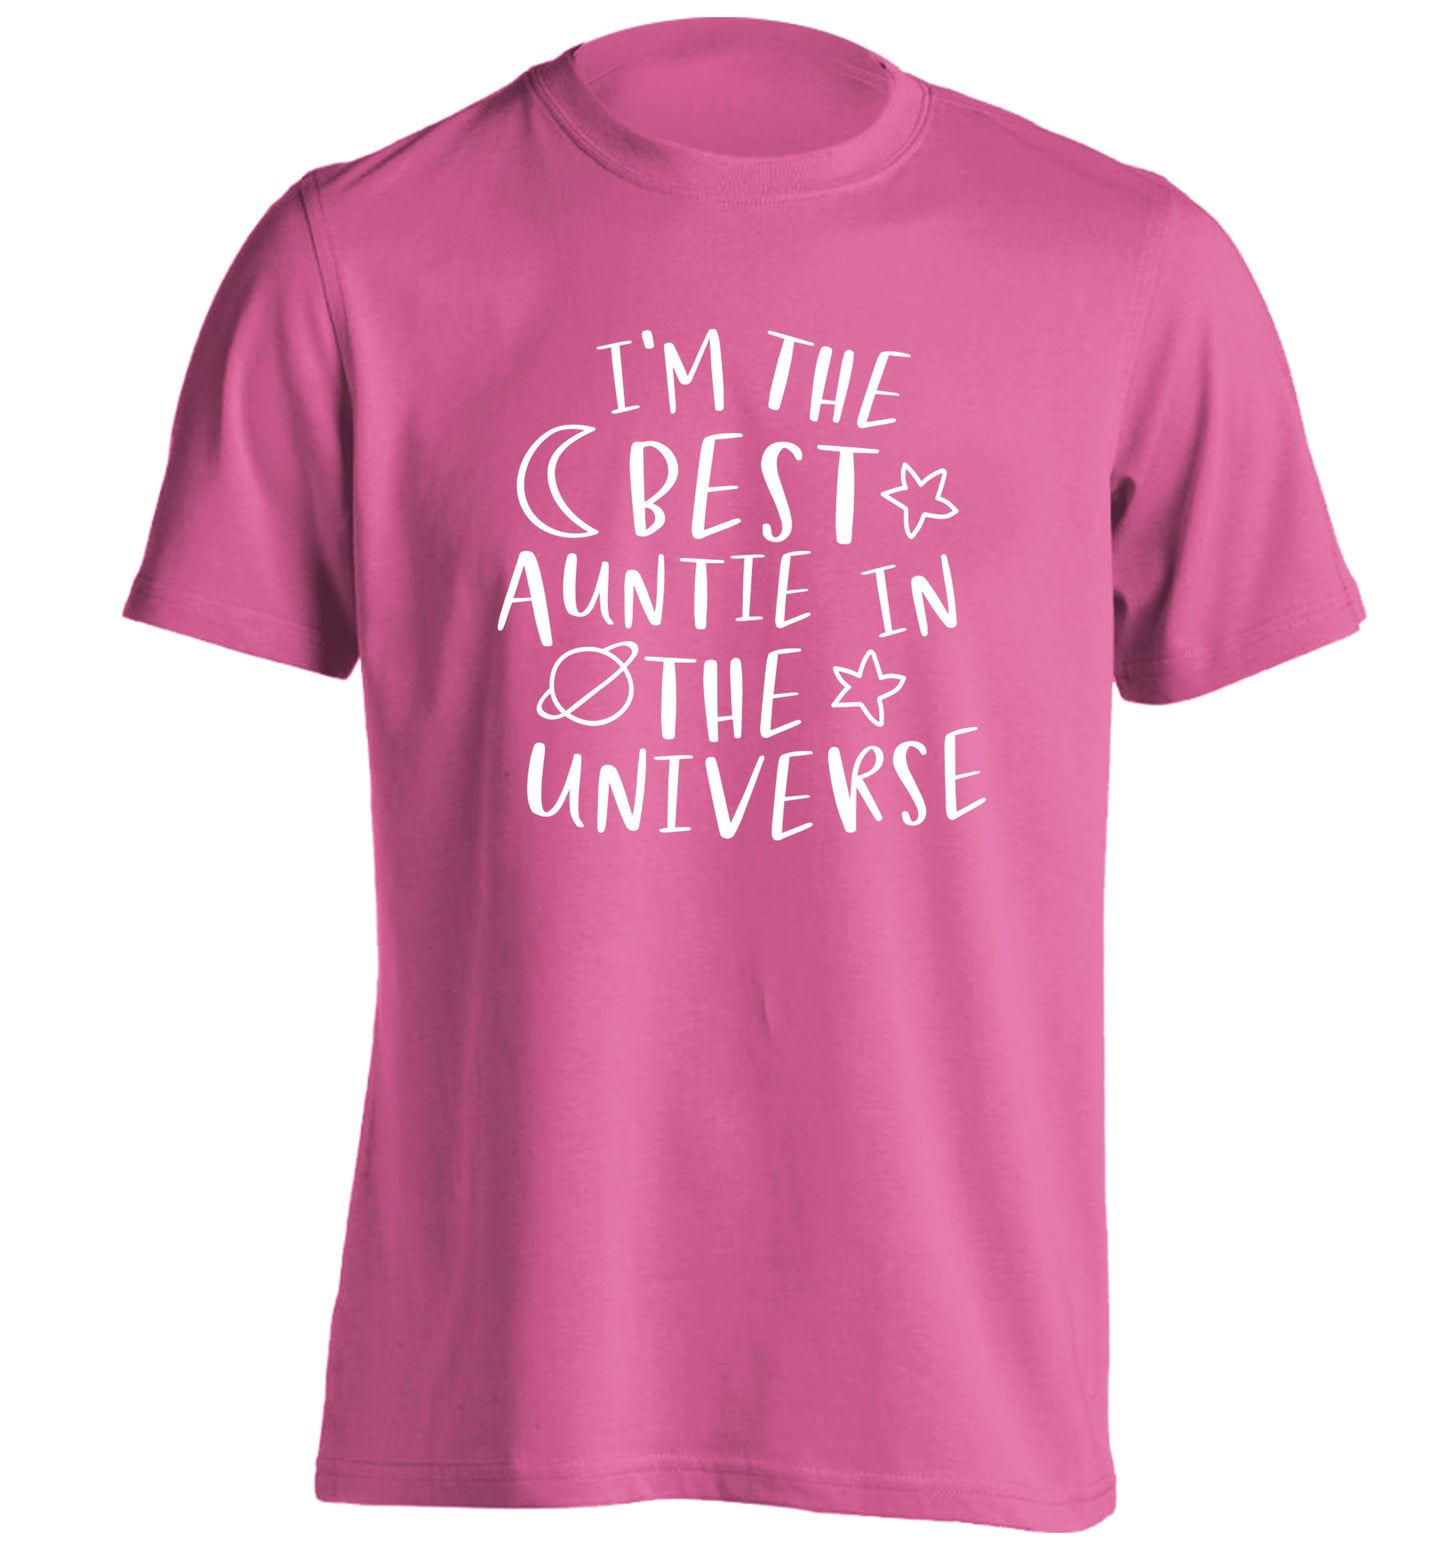 I'm the best auntie in the universe adults unisex pink Tshirt 2XL